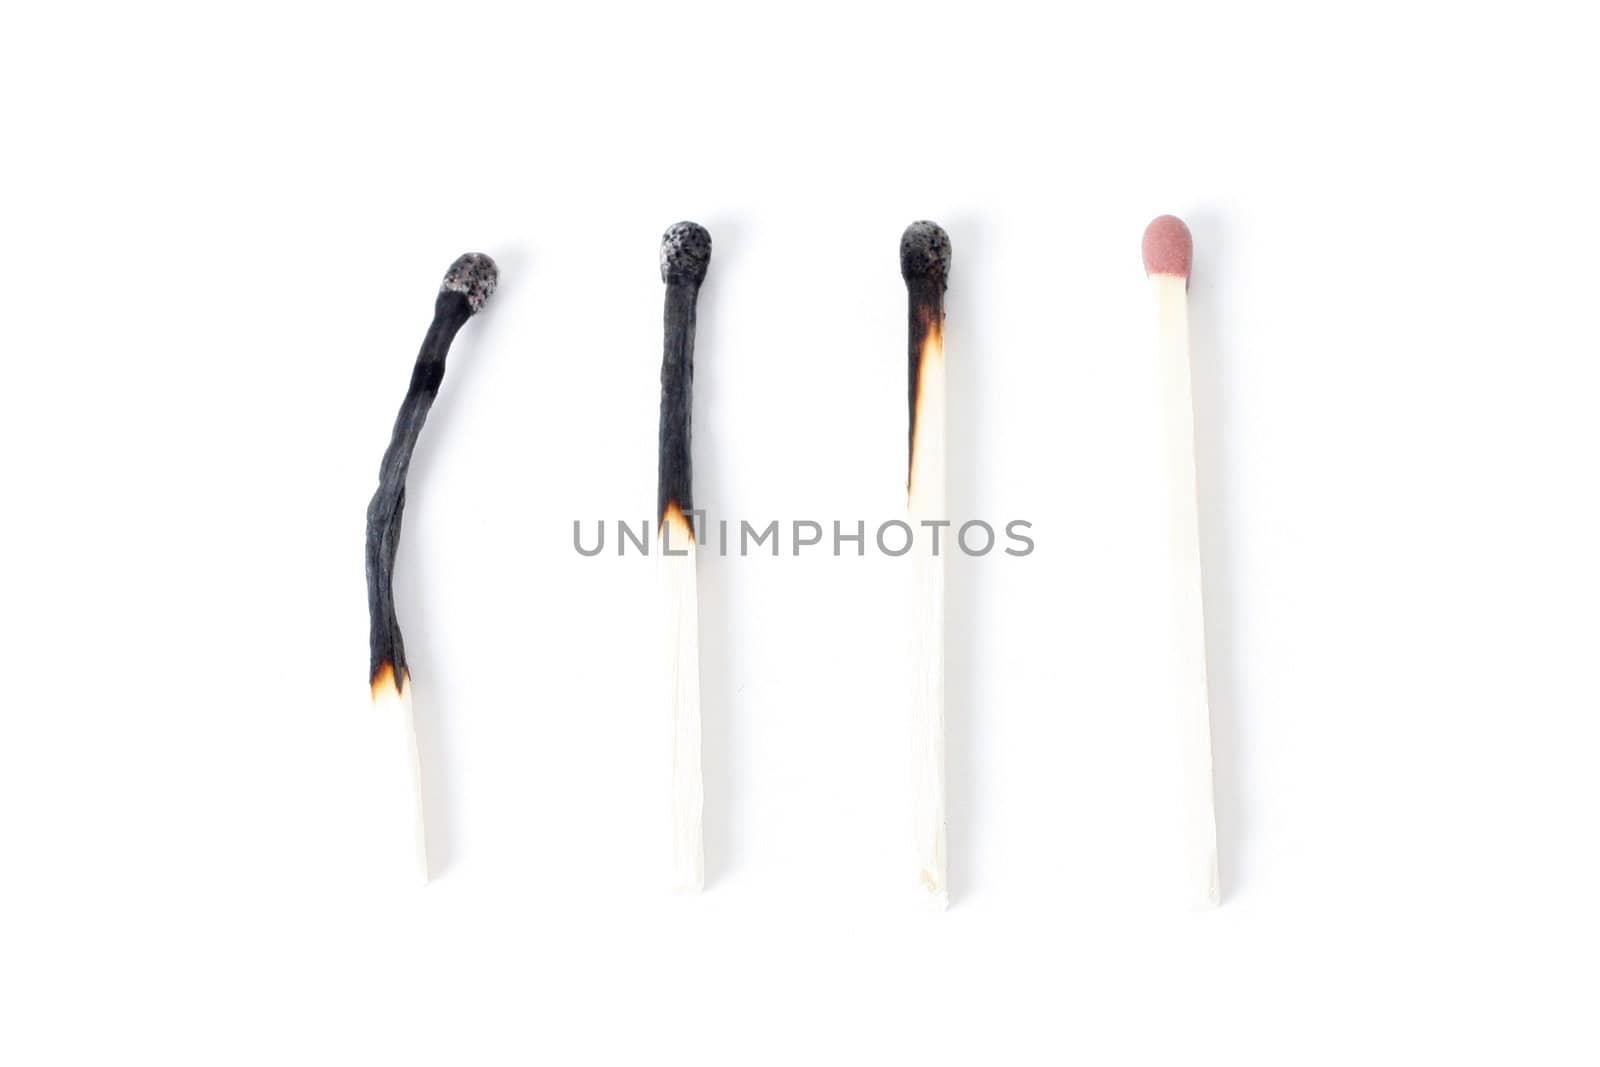 Matches by leeser